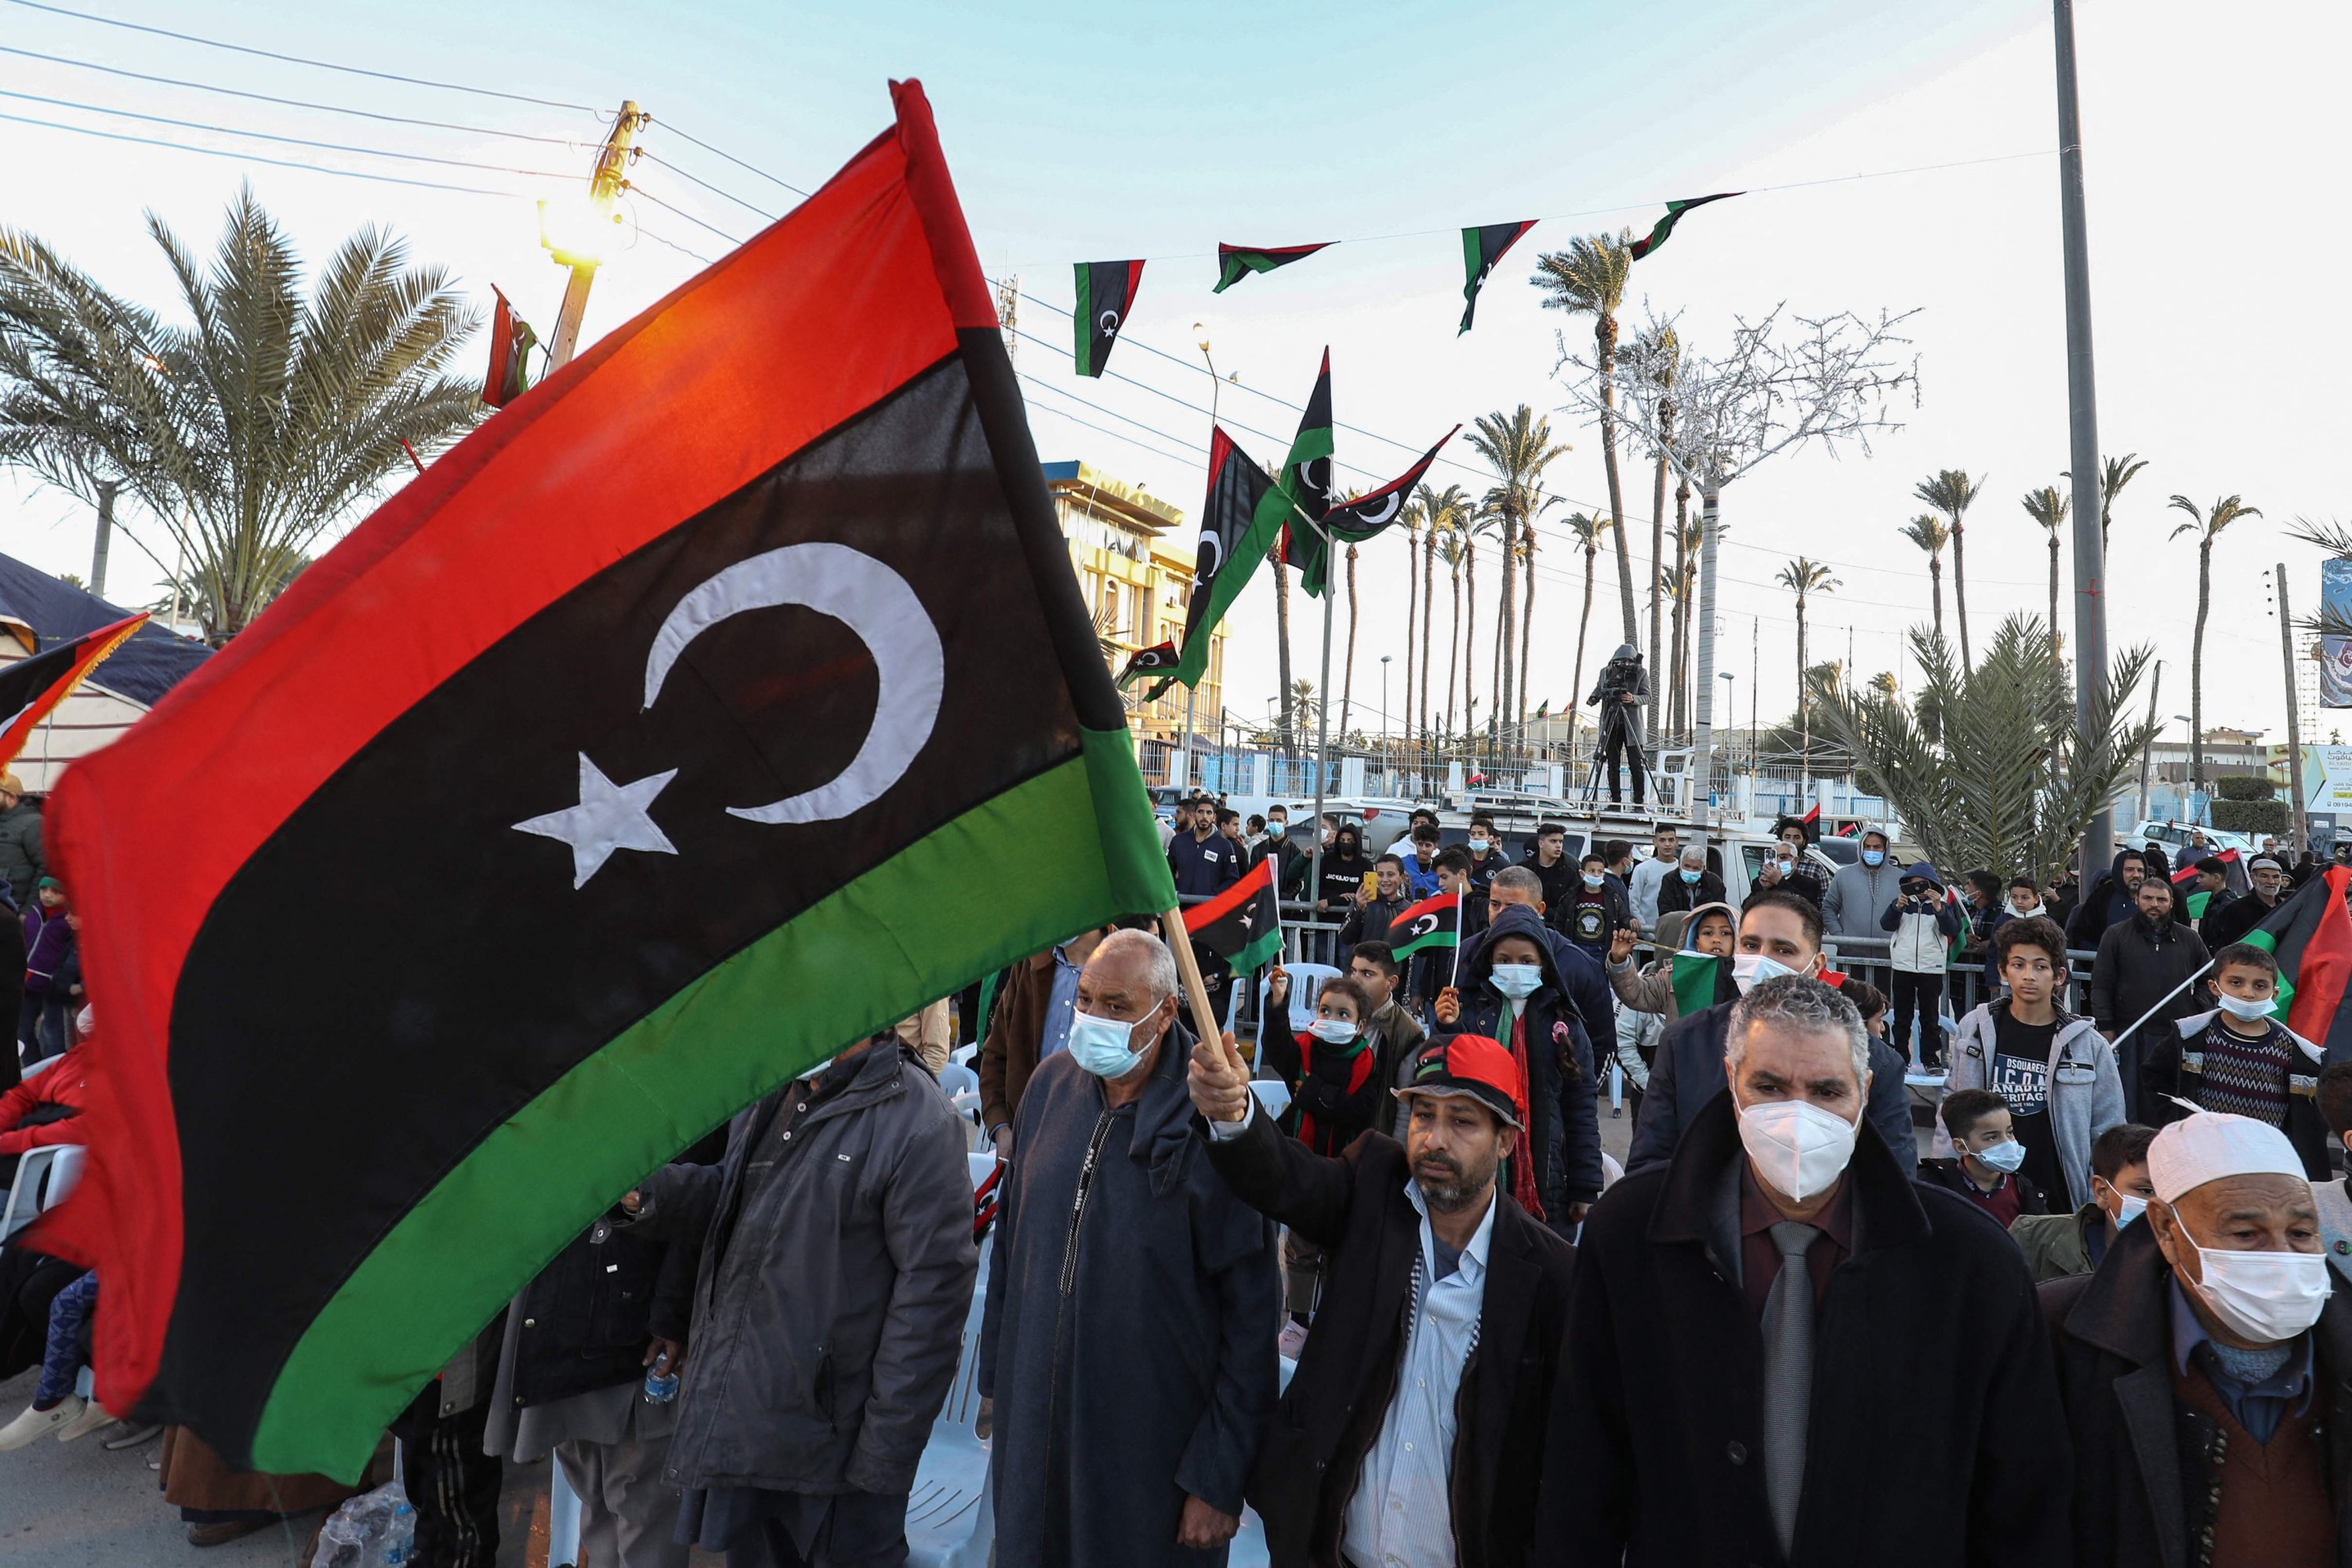 Libyans mark 11 years since start of civil war as country's future in limbo